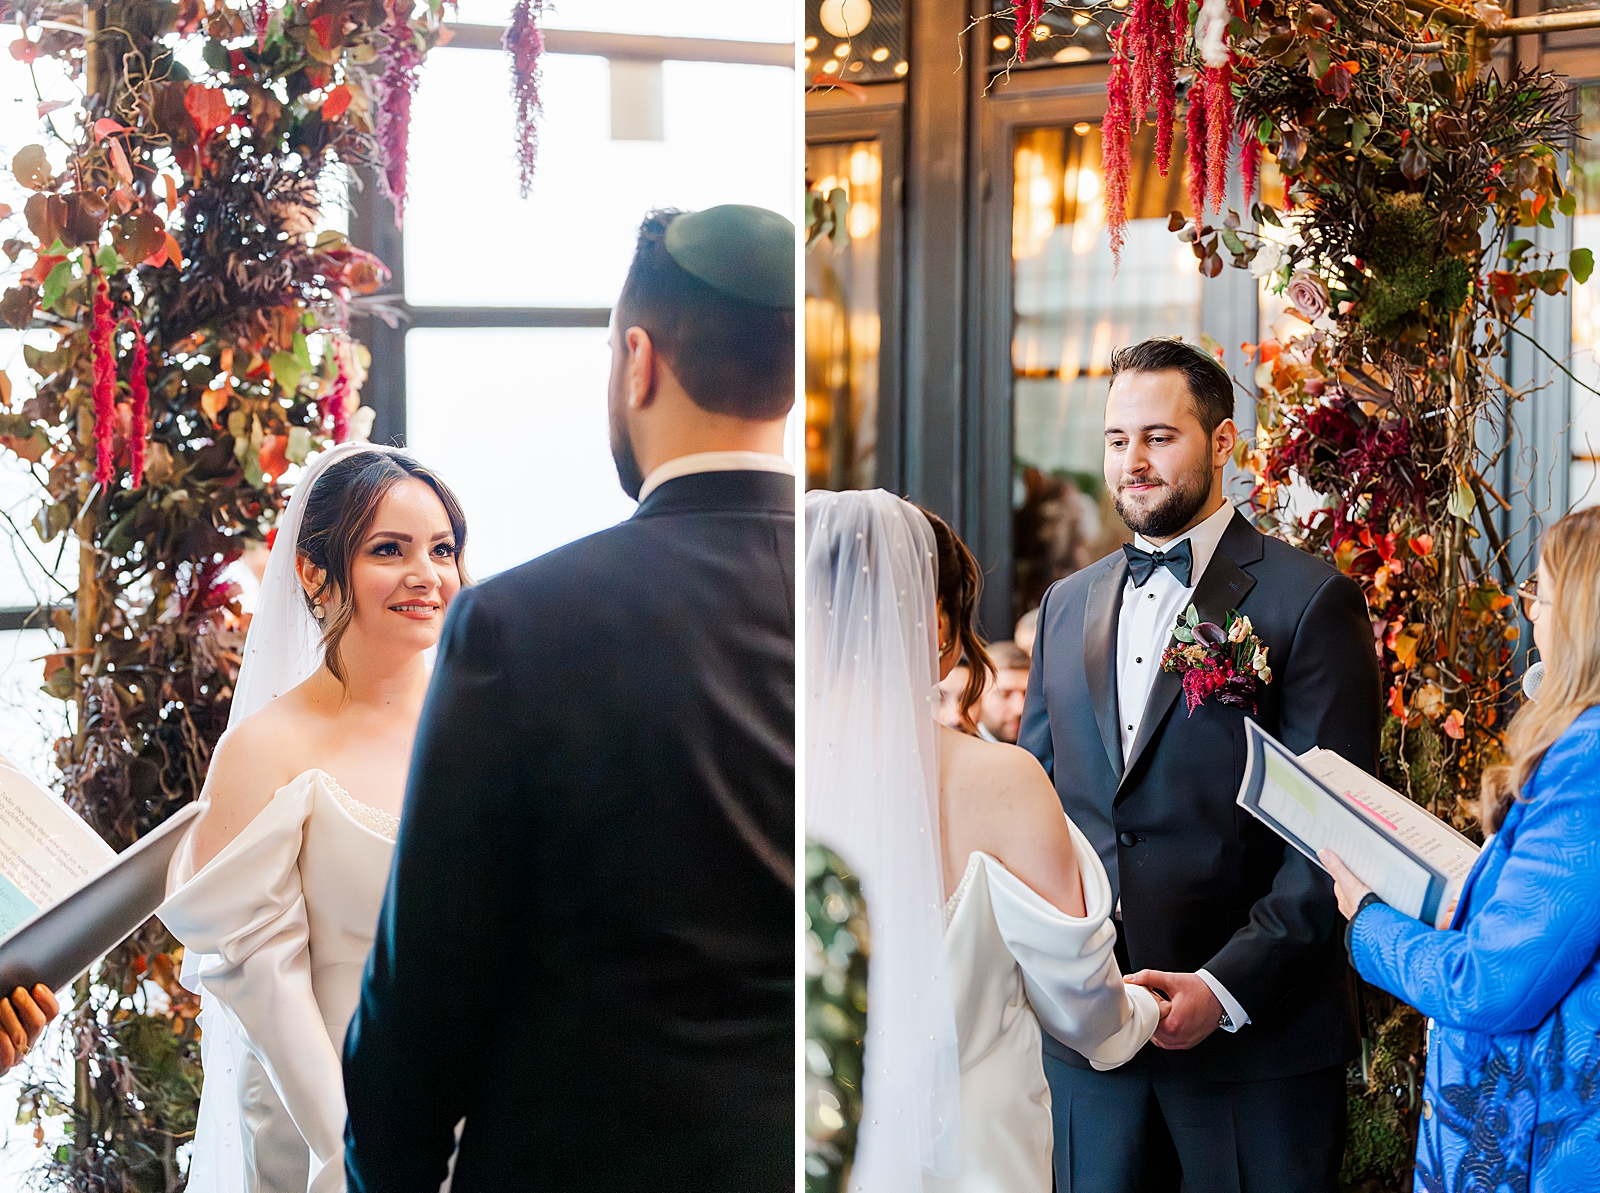 Left photo: Shot of the bride smiling at the groom as they stand beneath the chuppah. 
Right photo: Shot of the groom smiling at the bride as they stand beneath the chuppah. 